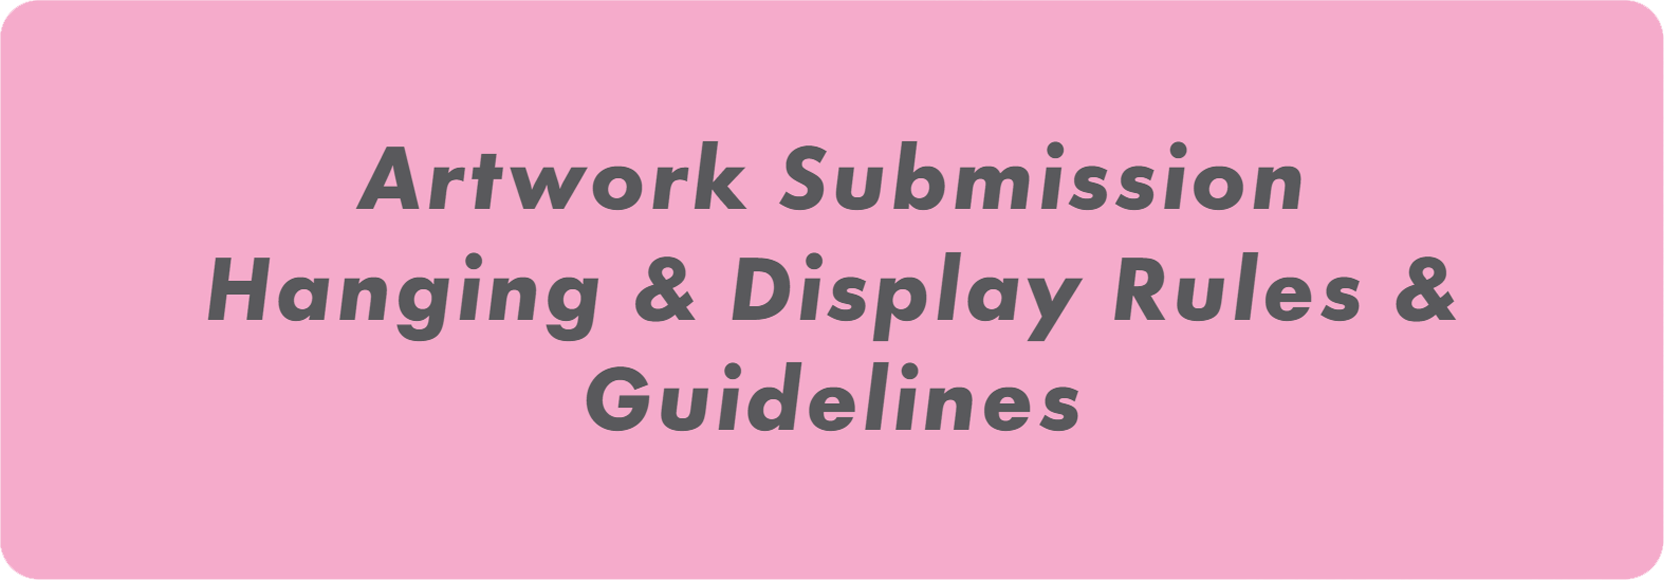 ARTWORK SUBMISSION HANGING & DISPLAY RULES & GUIDELINES